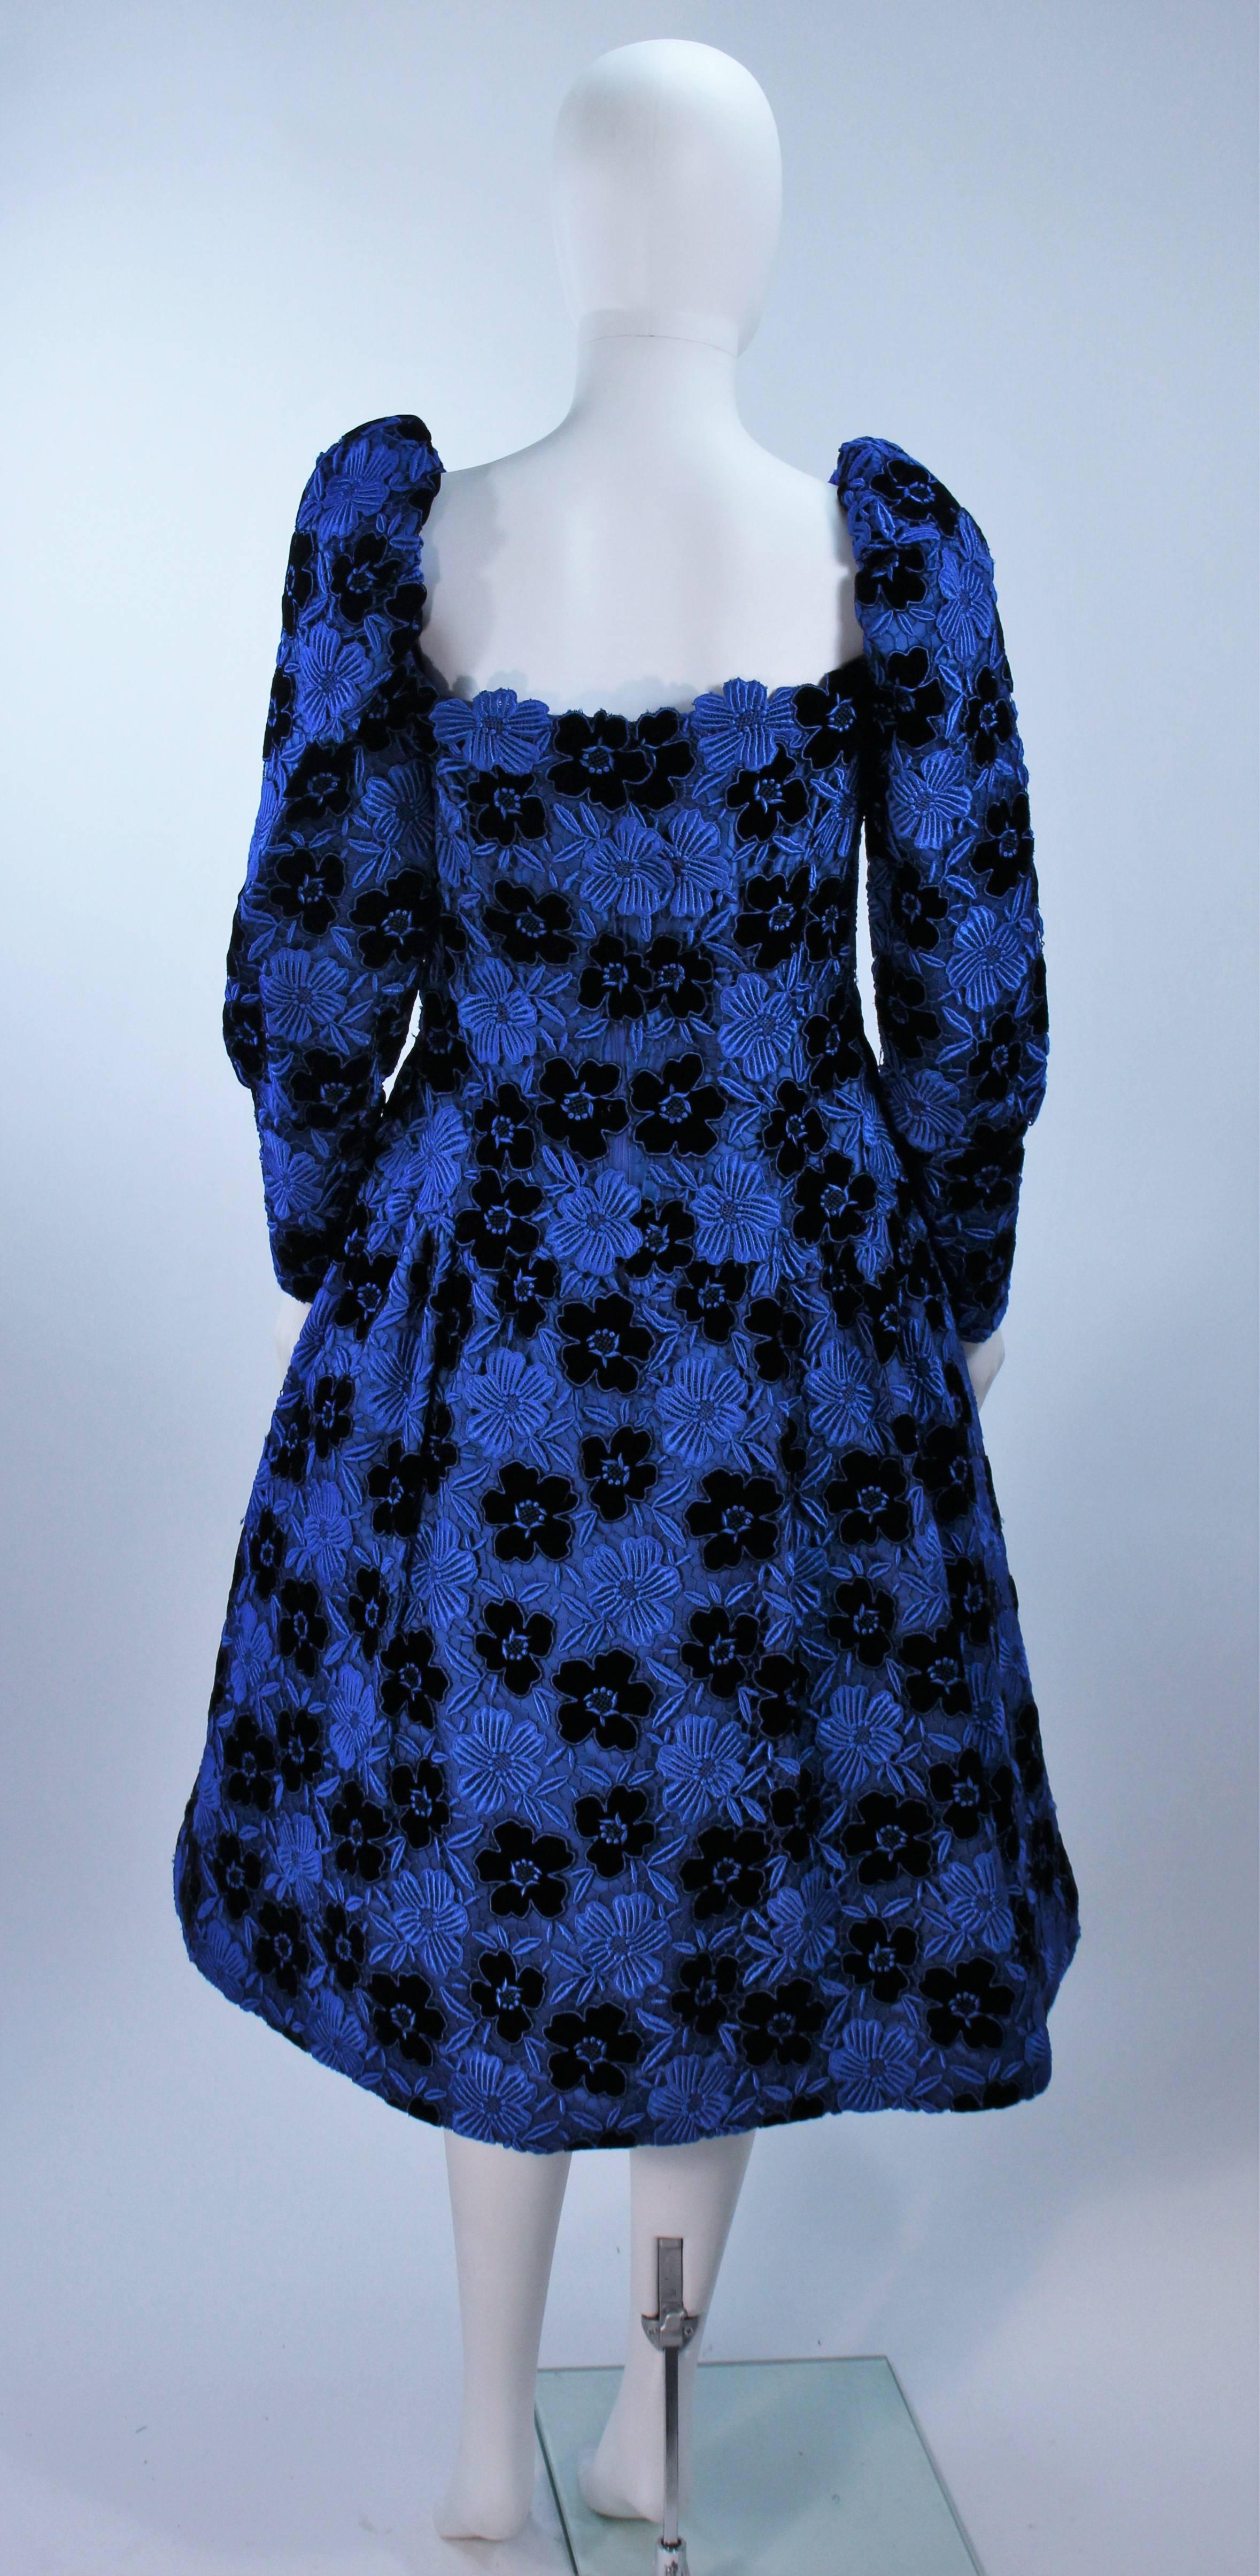 ARNOLD SCAASI Cobalt Blue Evening Dress with Floral Pattern Size 10-12 4